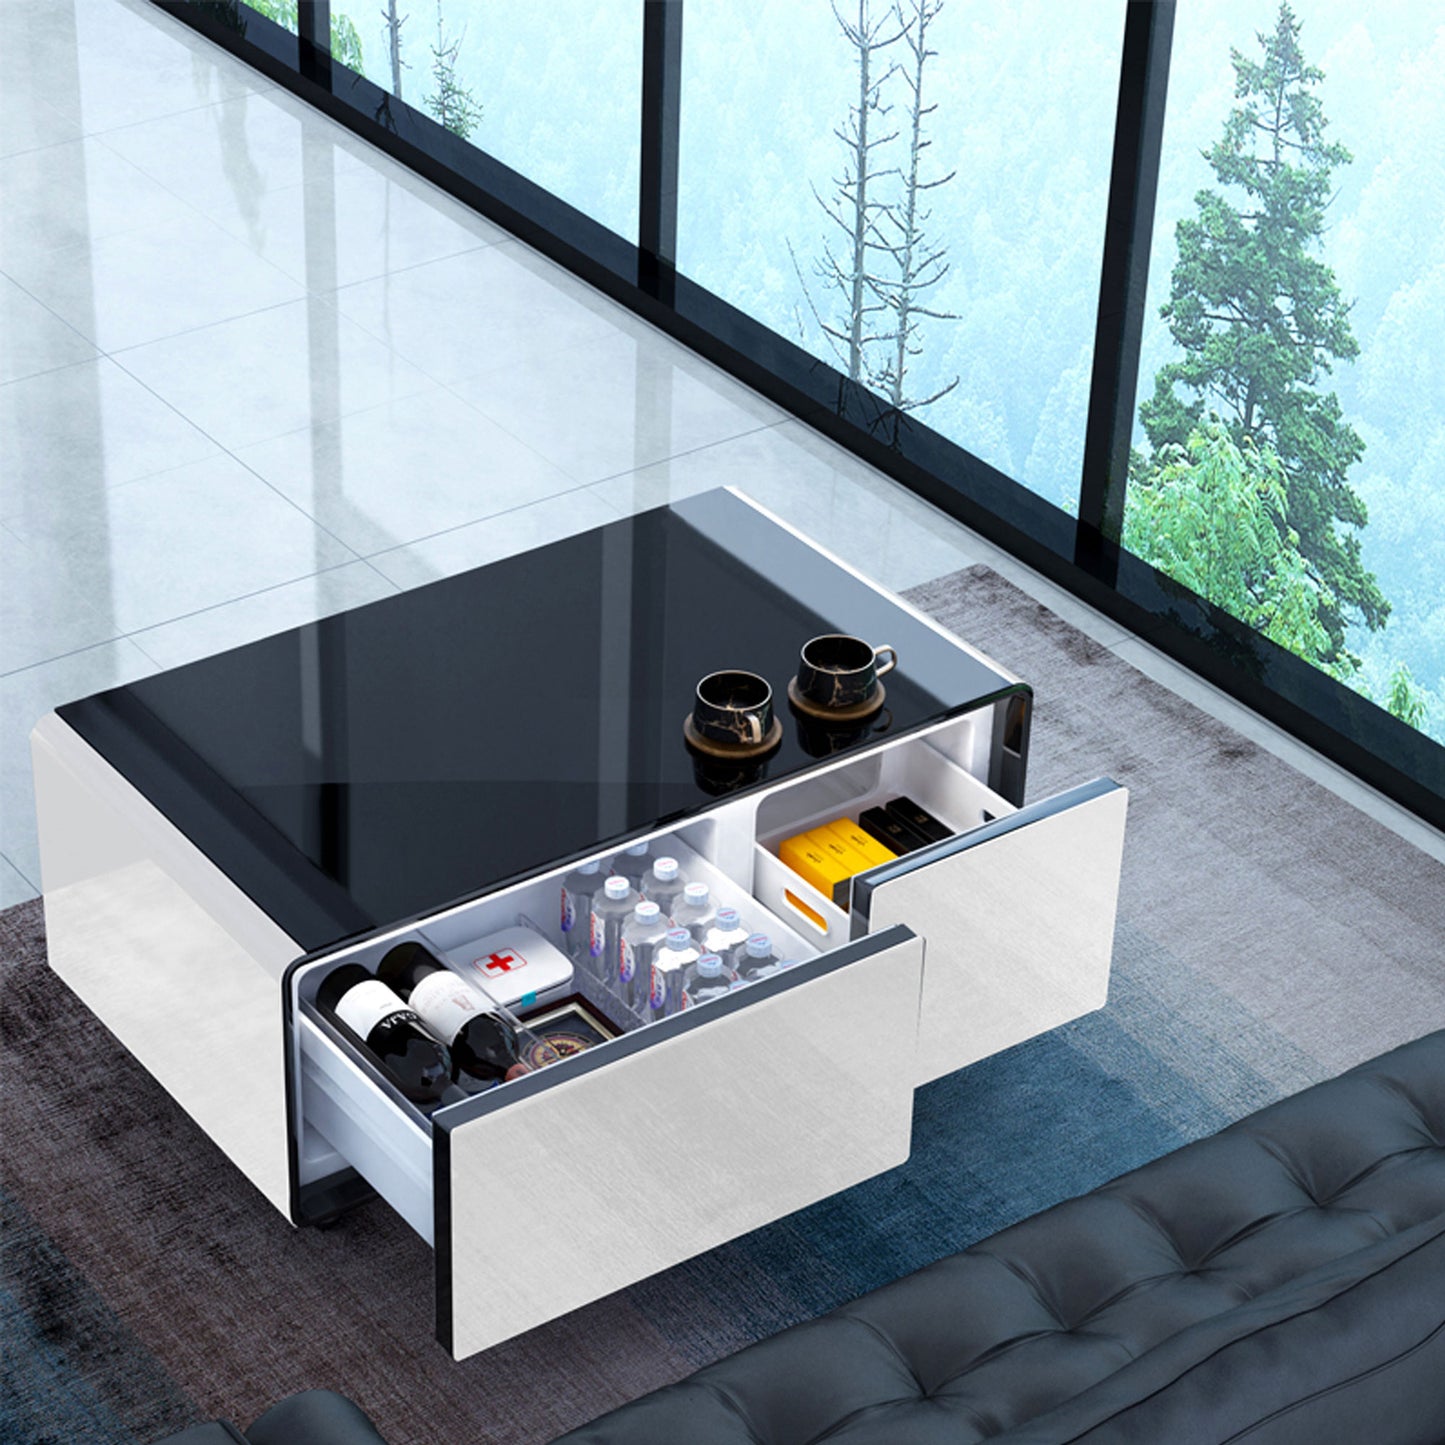 Smart mini Coffee Table with Built in Fridge and Wireless device charging